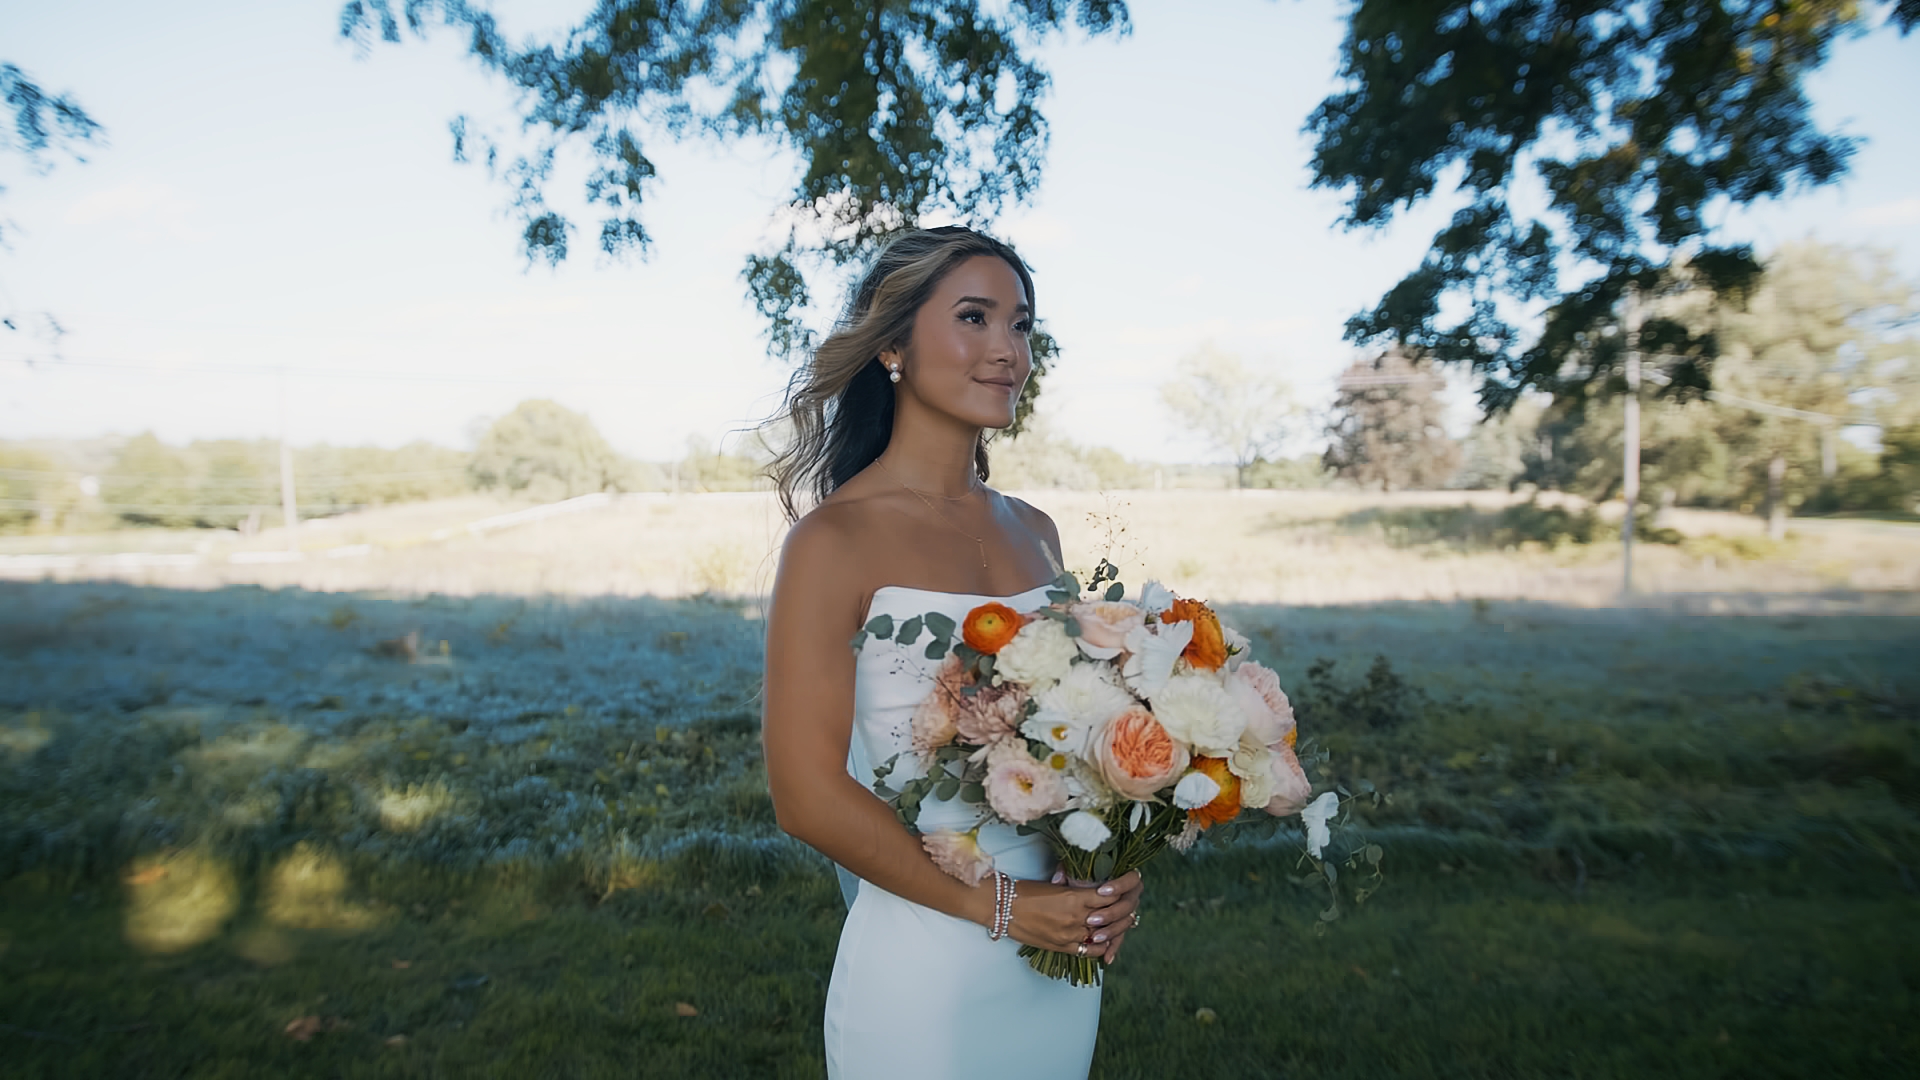 Stunning Bride and Bouquet at a Cornman Farms Wedding